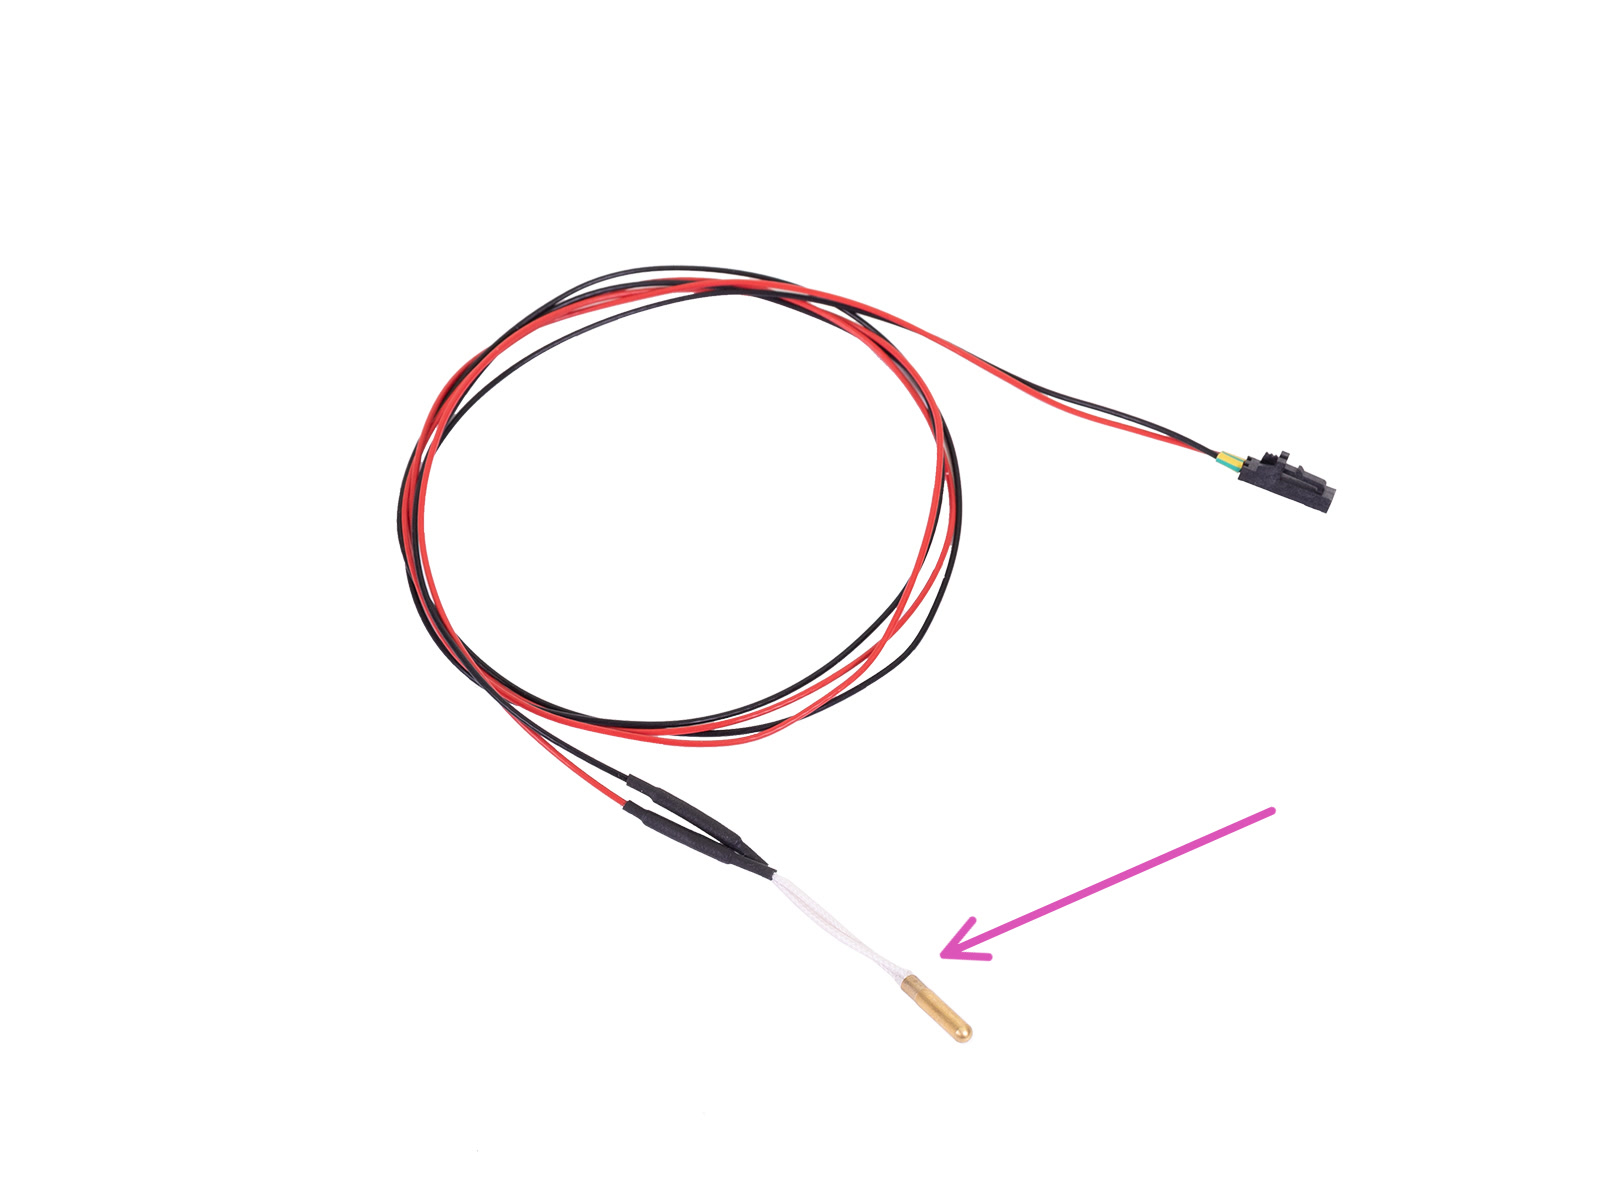 New hotend thermistor - parts preparation (old design)